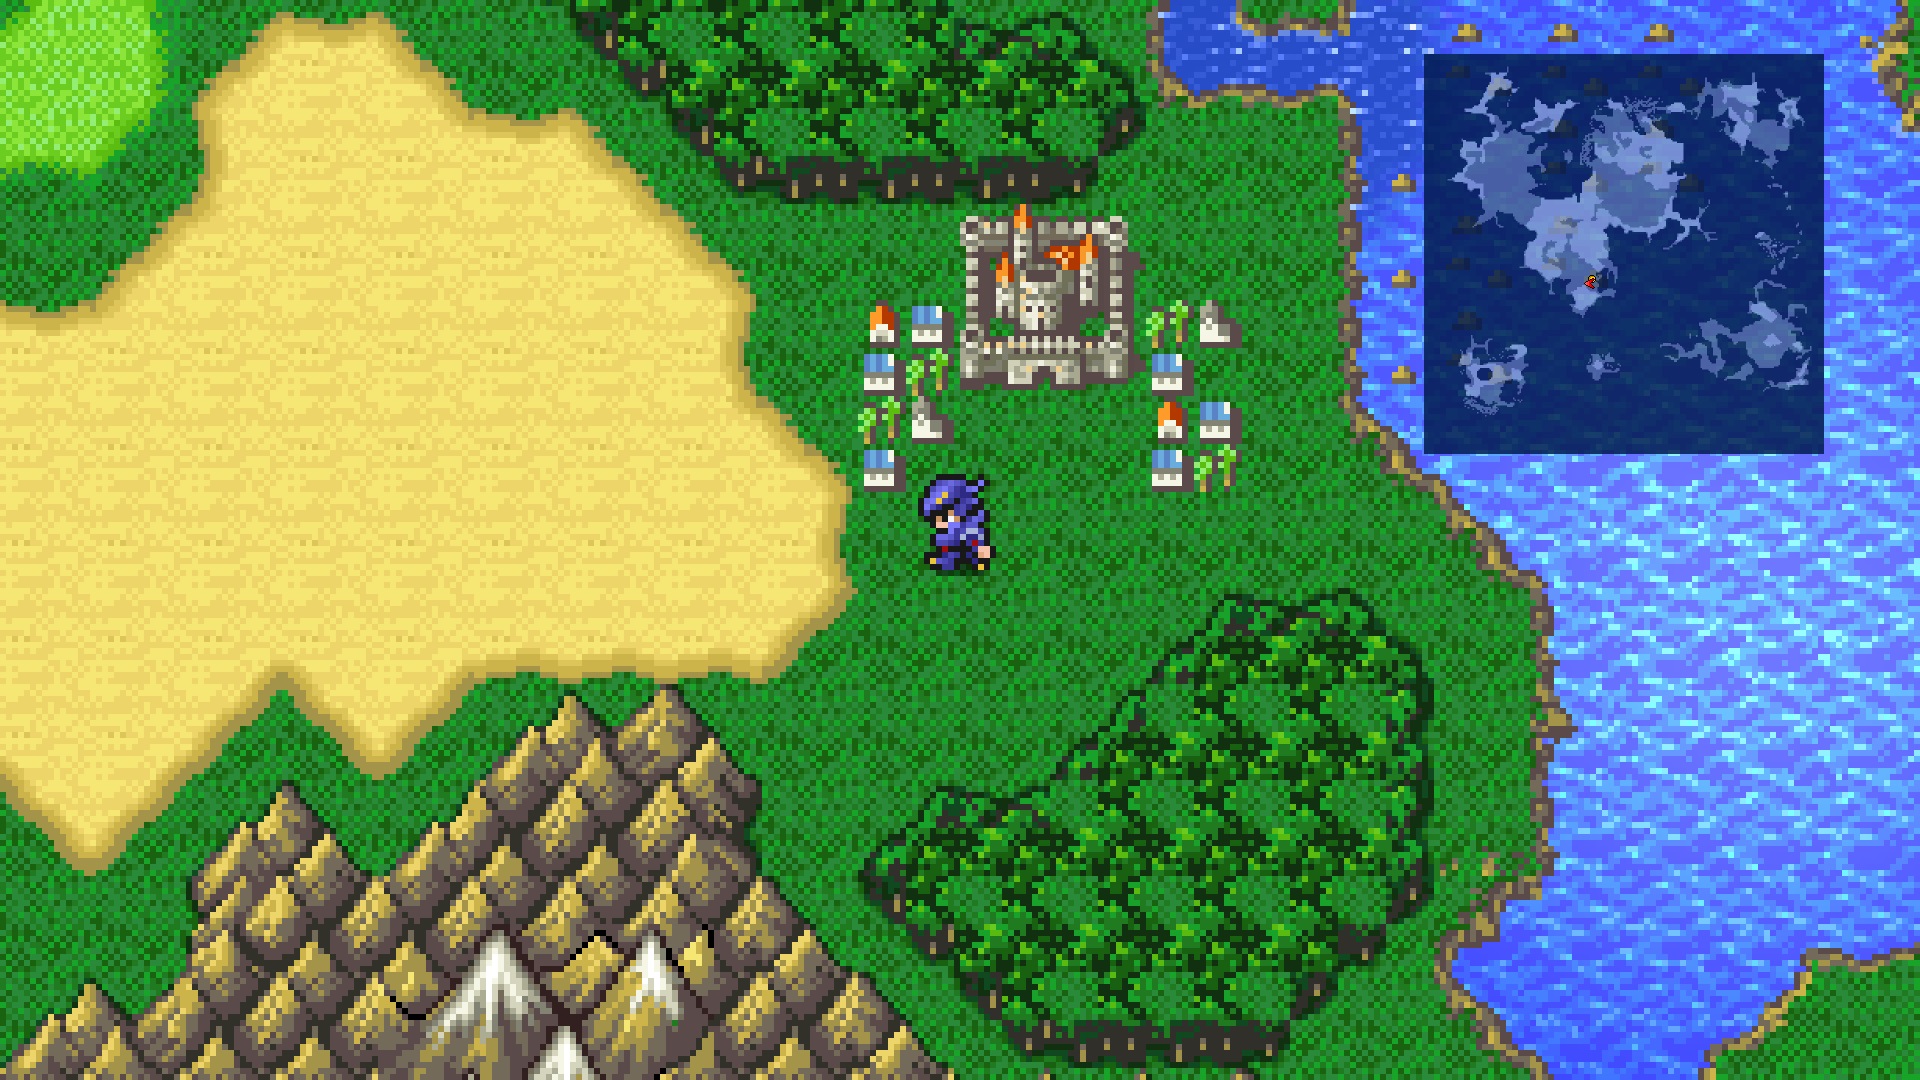 Gameplay screenshot showing dark knight CECIL from Final Fantasy 4 on a world map near a town